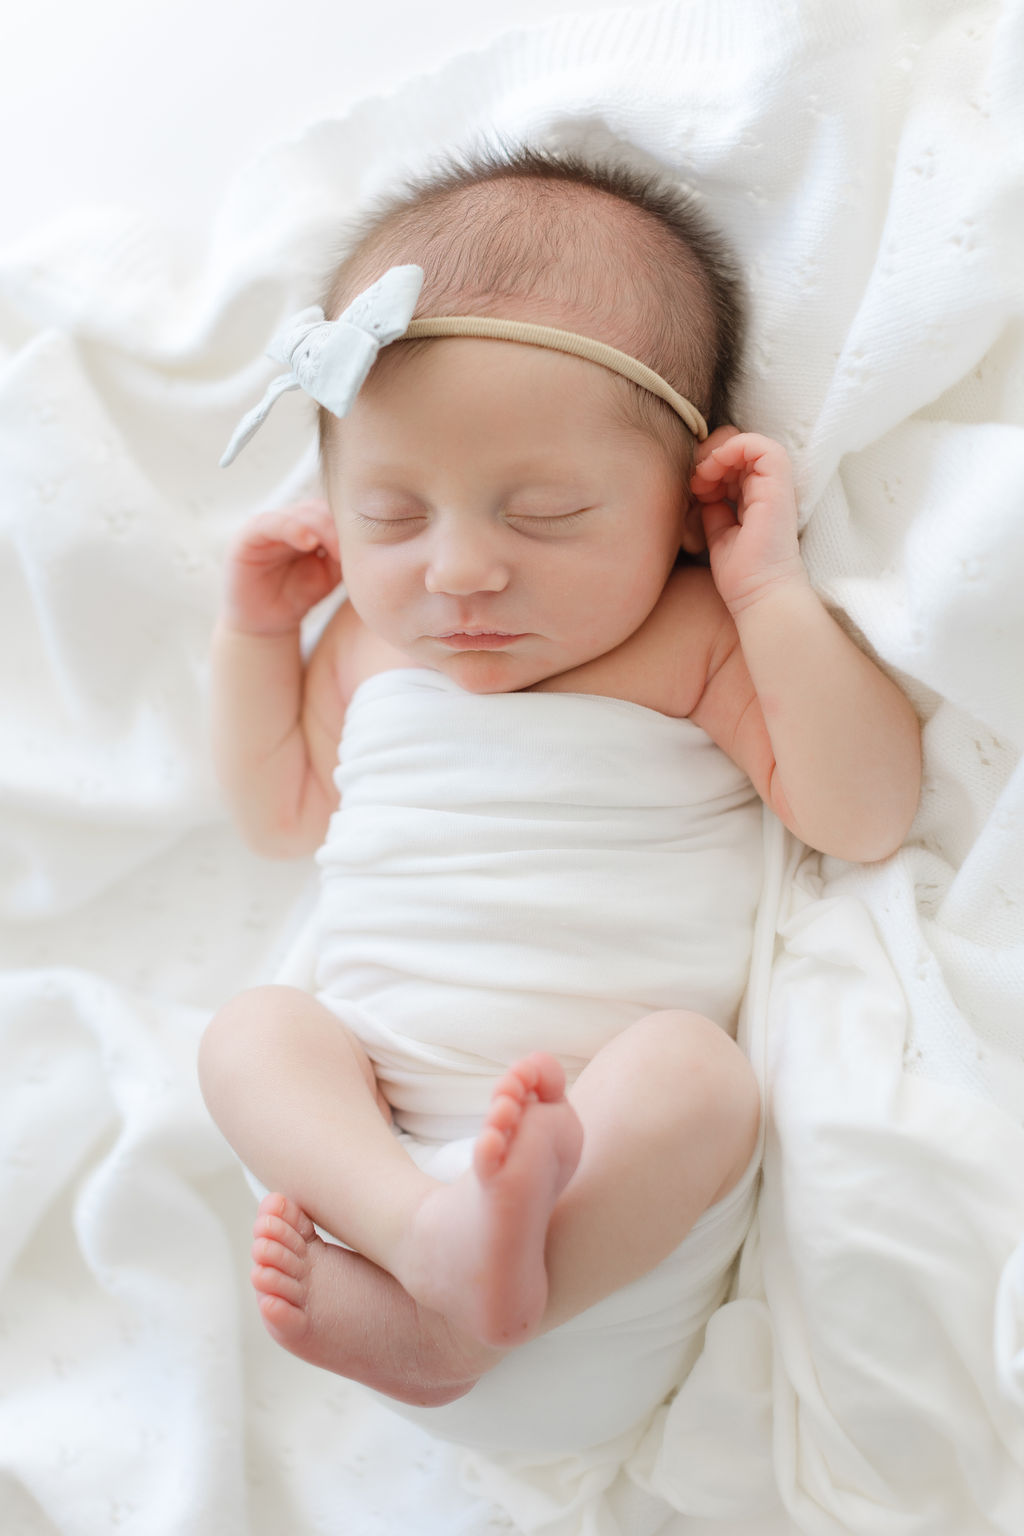 A newborn baby sleeps while wrapped with arms and legs loose in a white wrap on a white bed